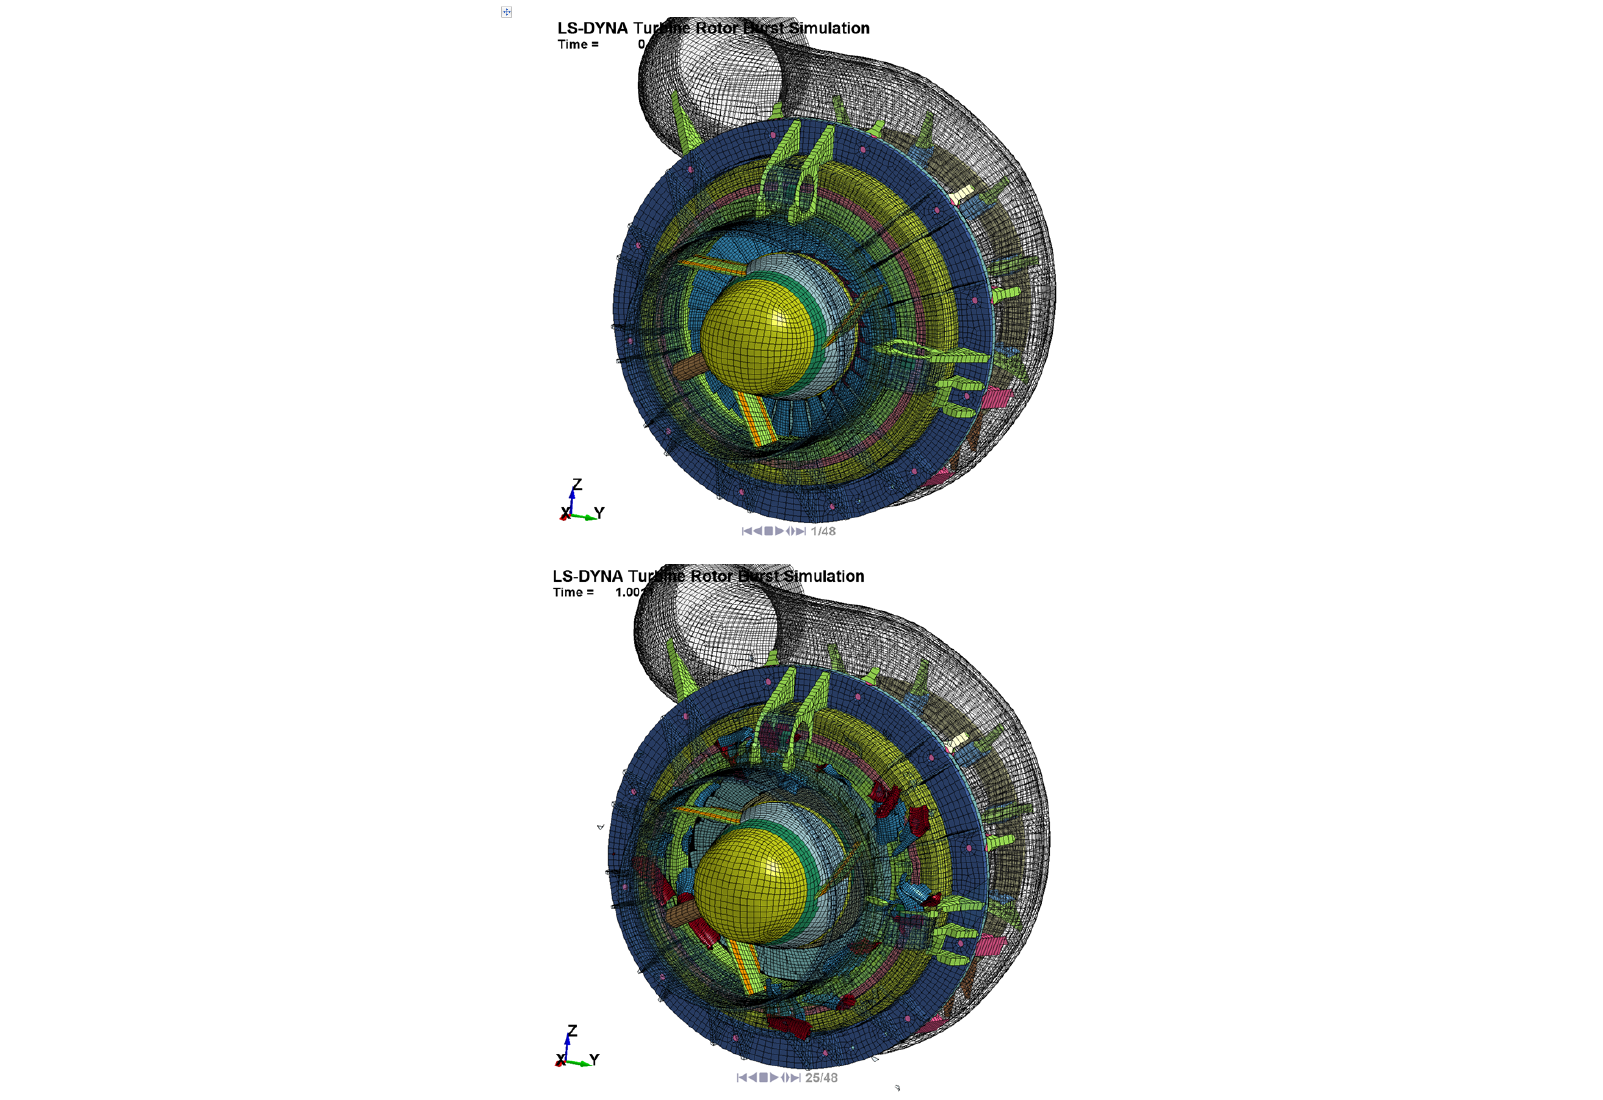 Figure 2:  LS-DYNA turbine rotor burst containment simulation at the start and near the end of the simulation.  Blade-out containment was not achieved on this prototype.